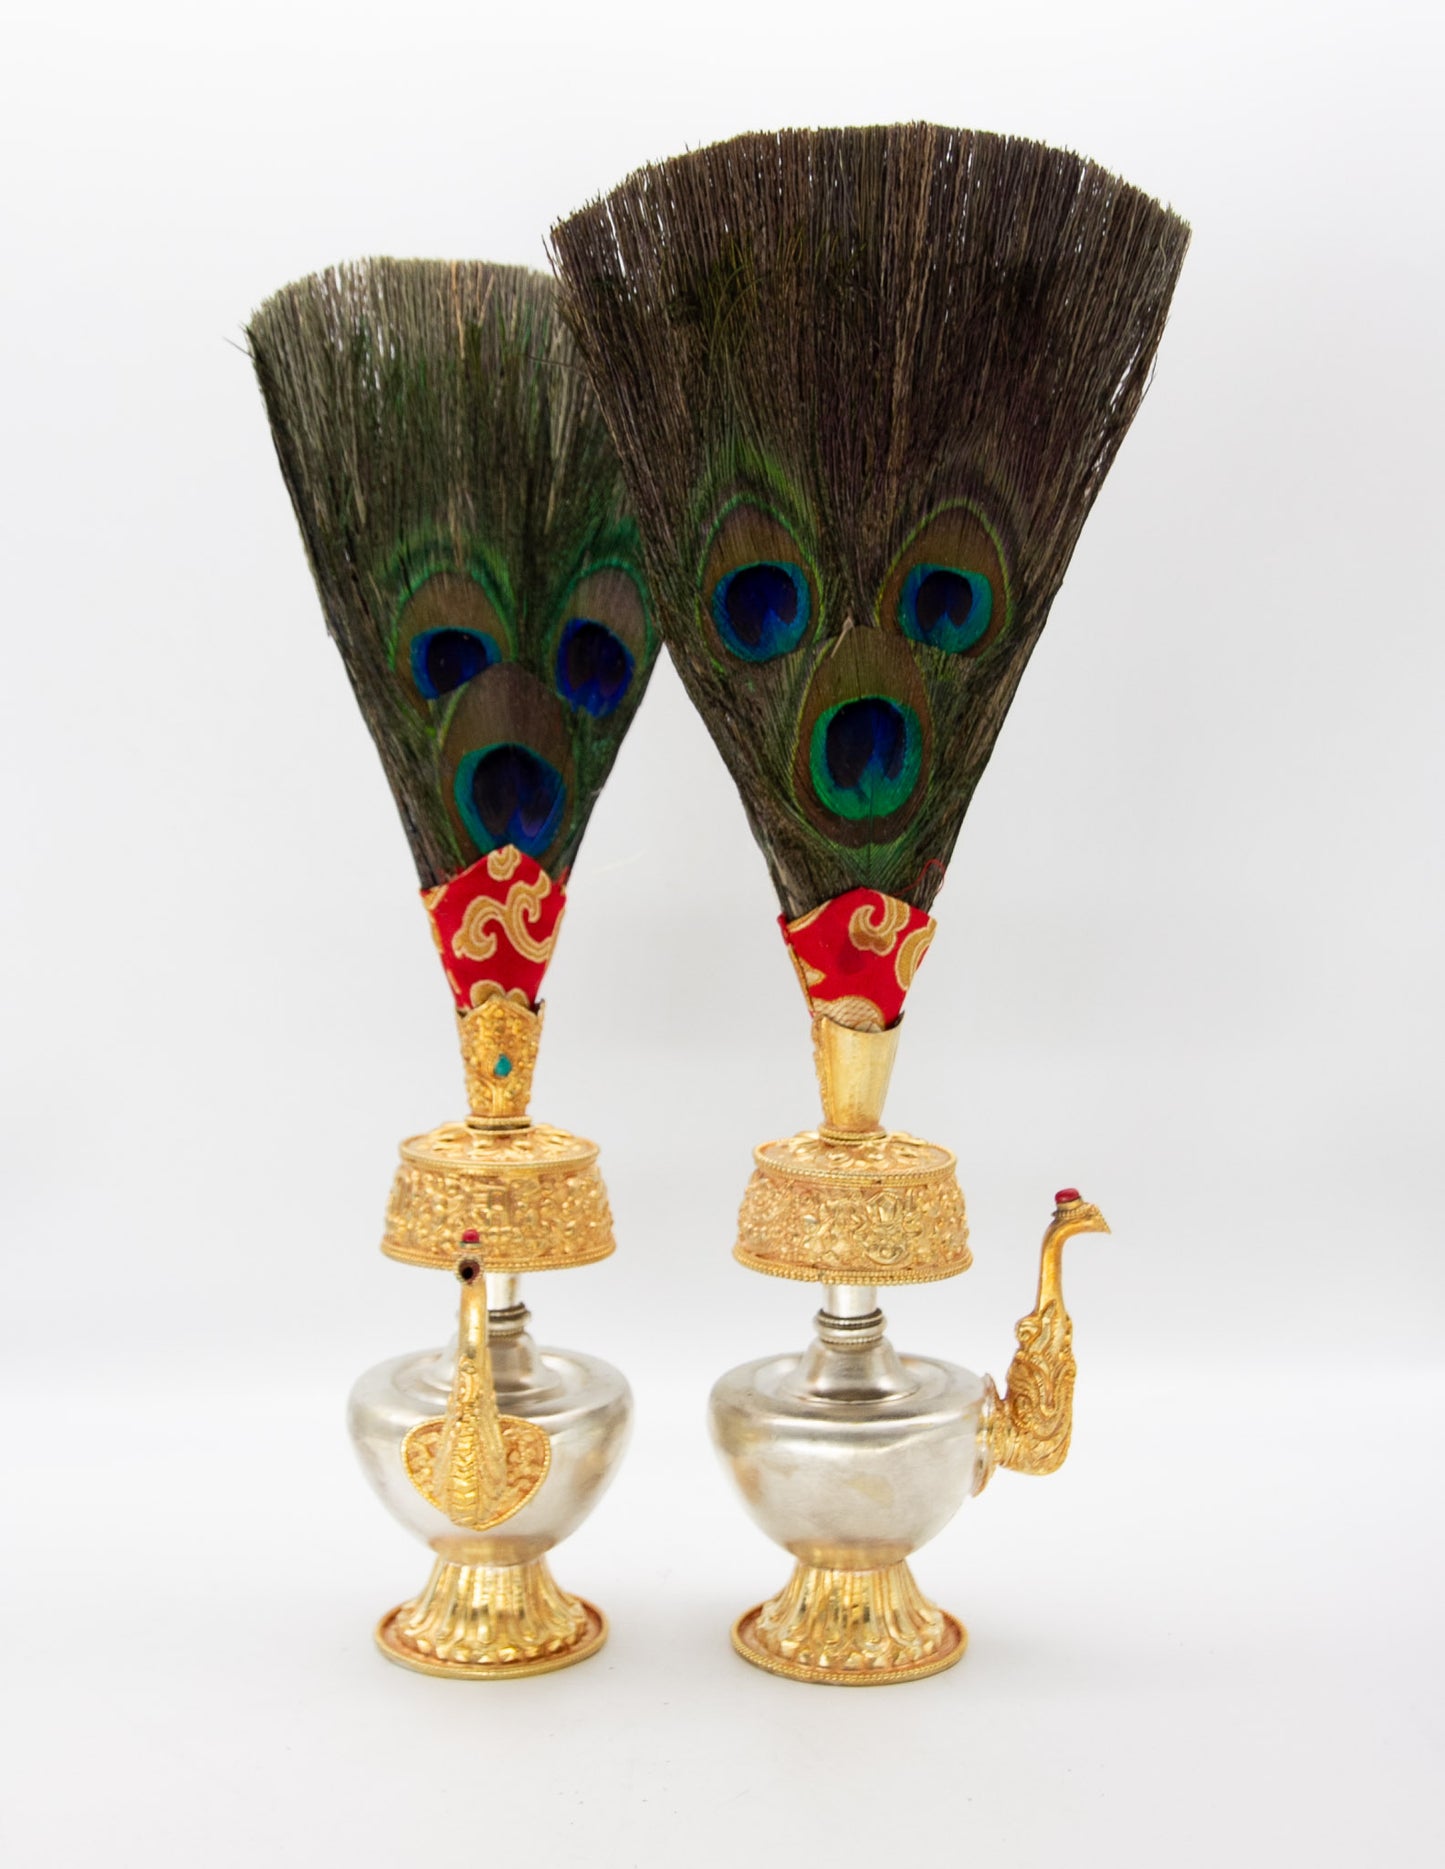 Silver and Gold Plated Bumpa Vase with Feathers